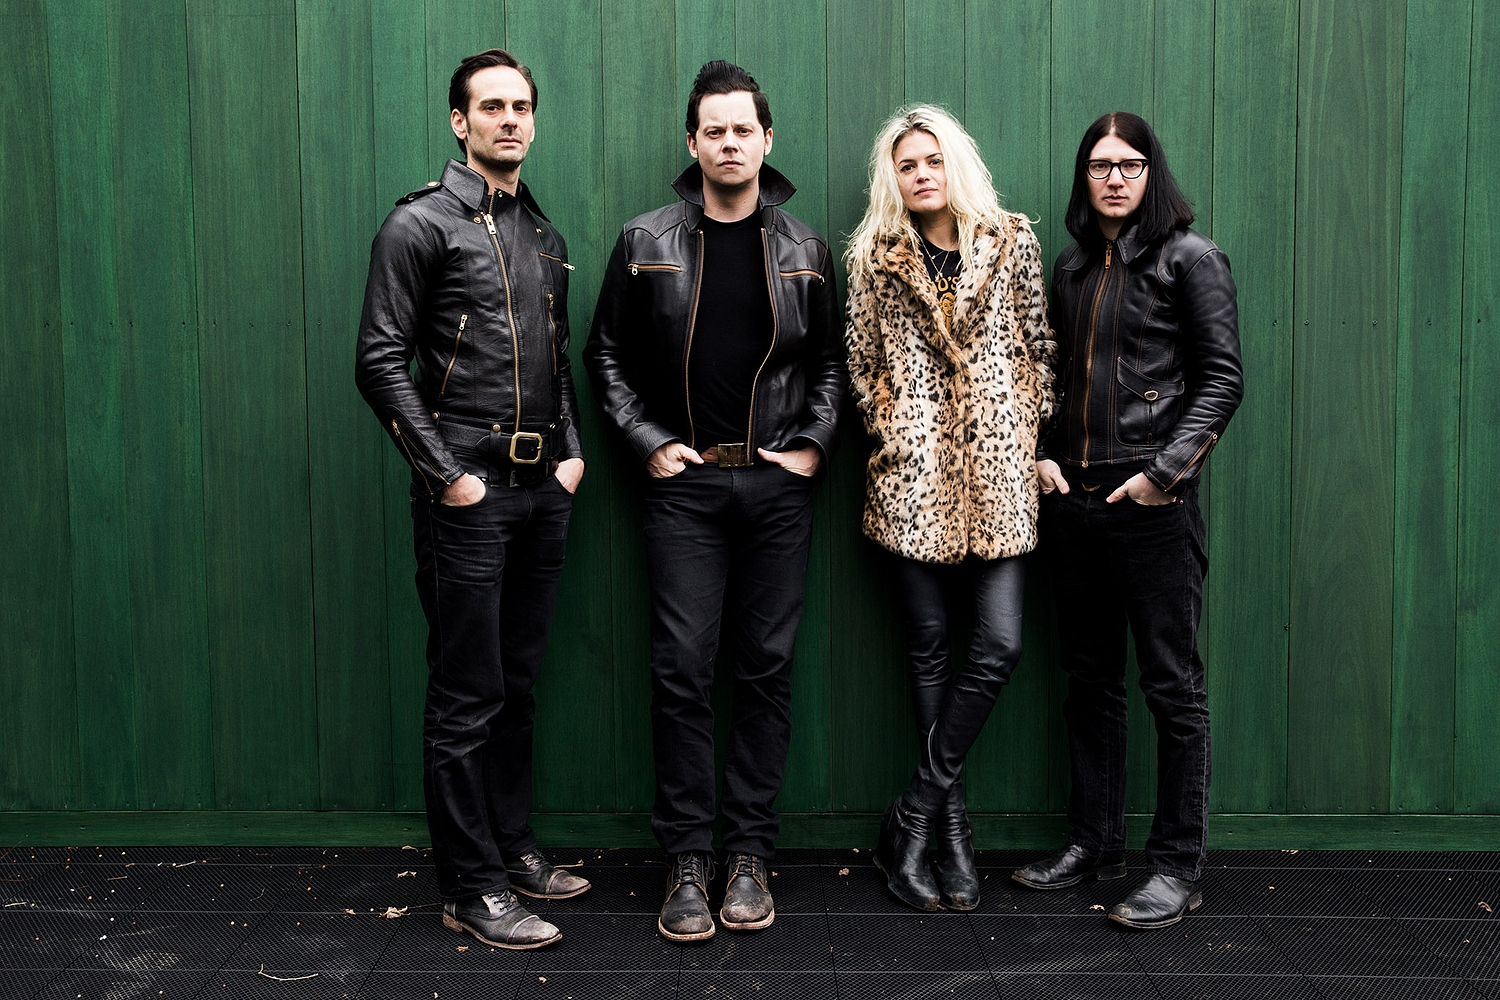 The Dead Weather perform ‘I Feel Love (Every Million Miles)’ on The Late Show